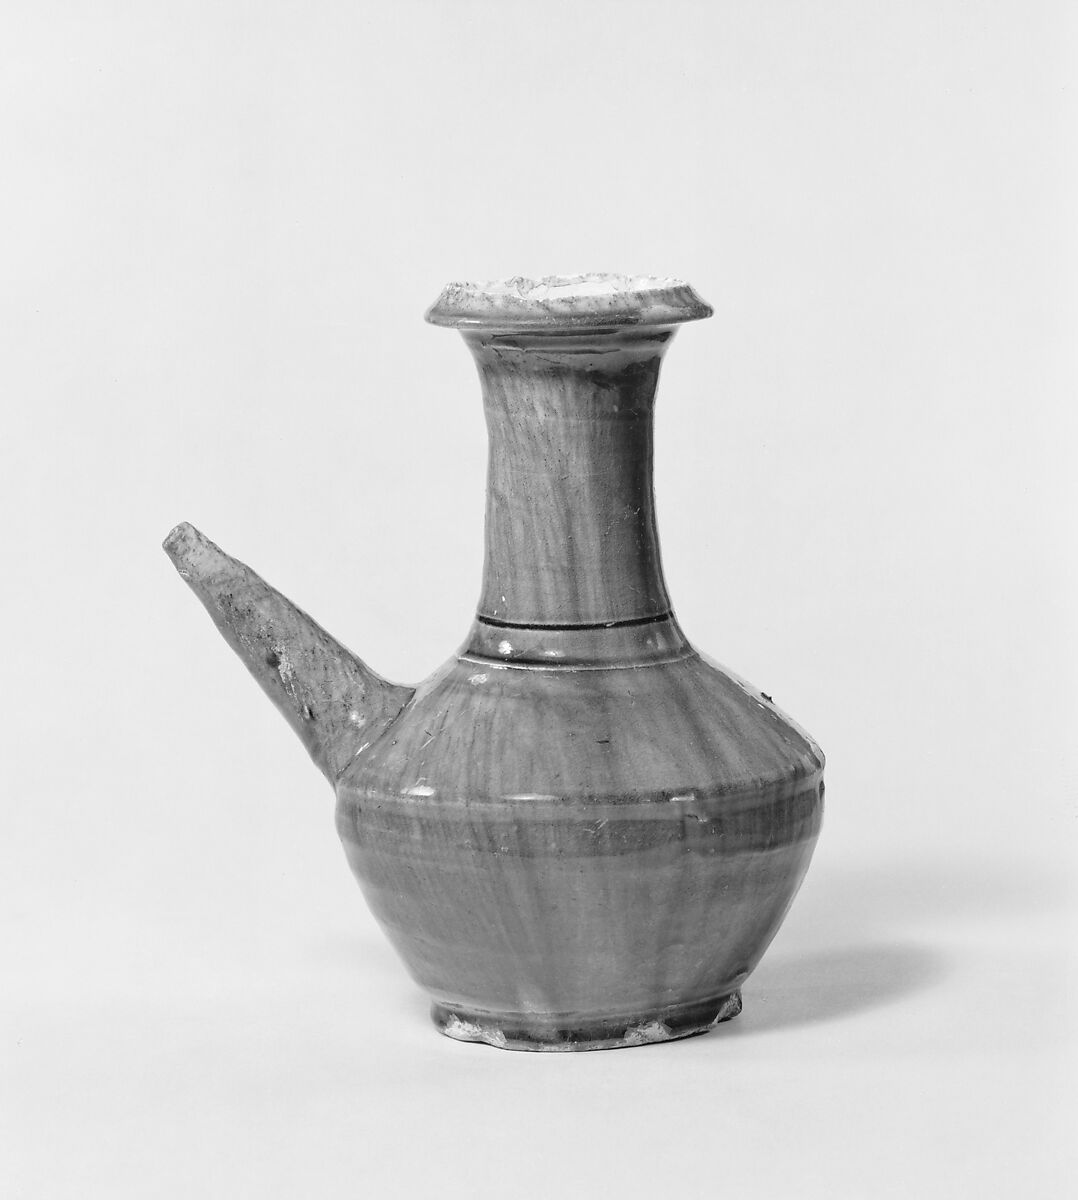 Vessel (Kendi), Earthenware with amber-colored glaze, China 